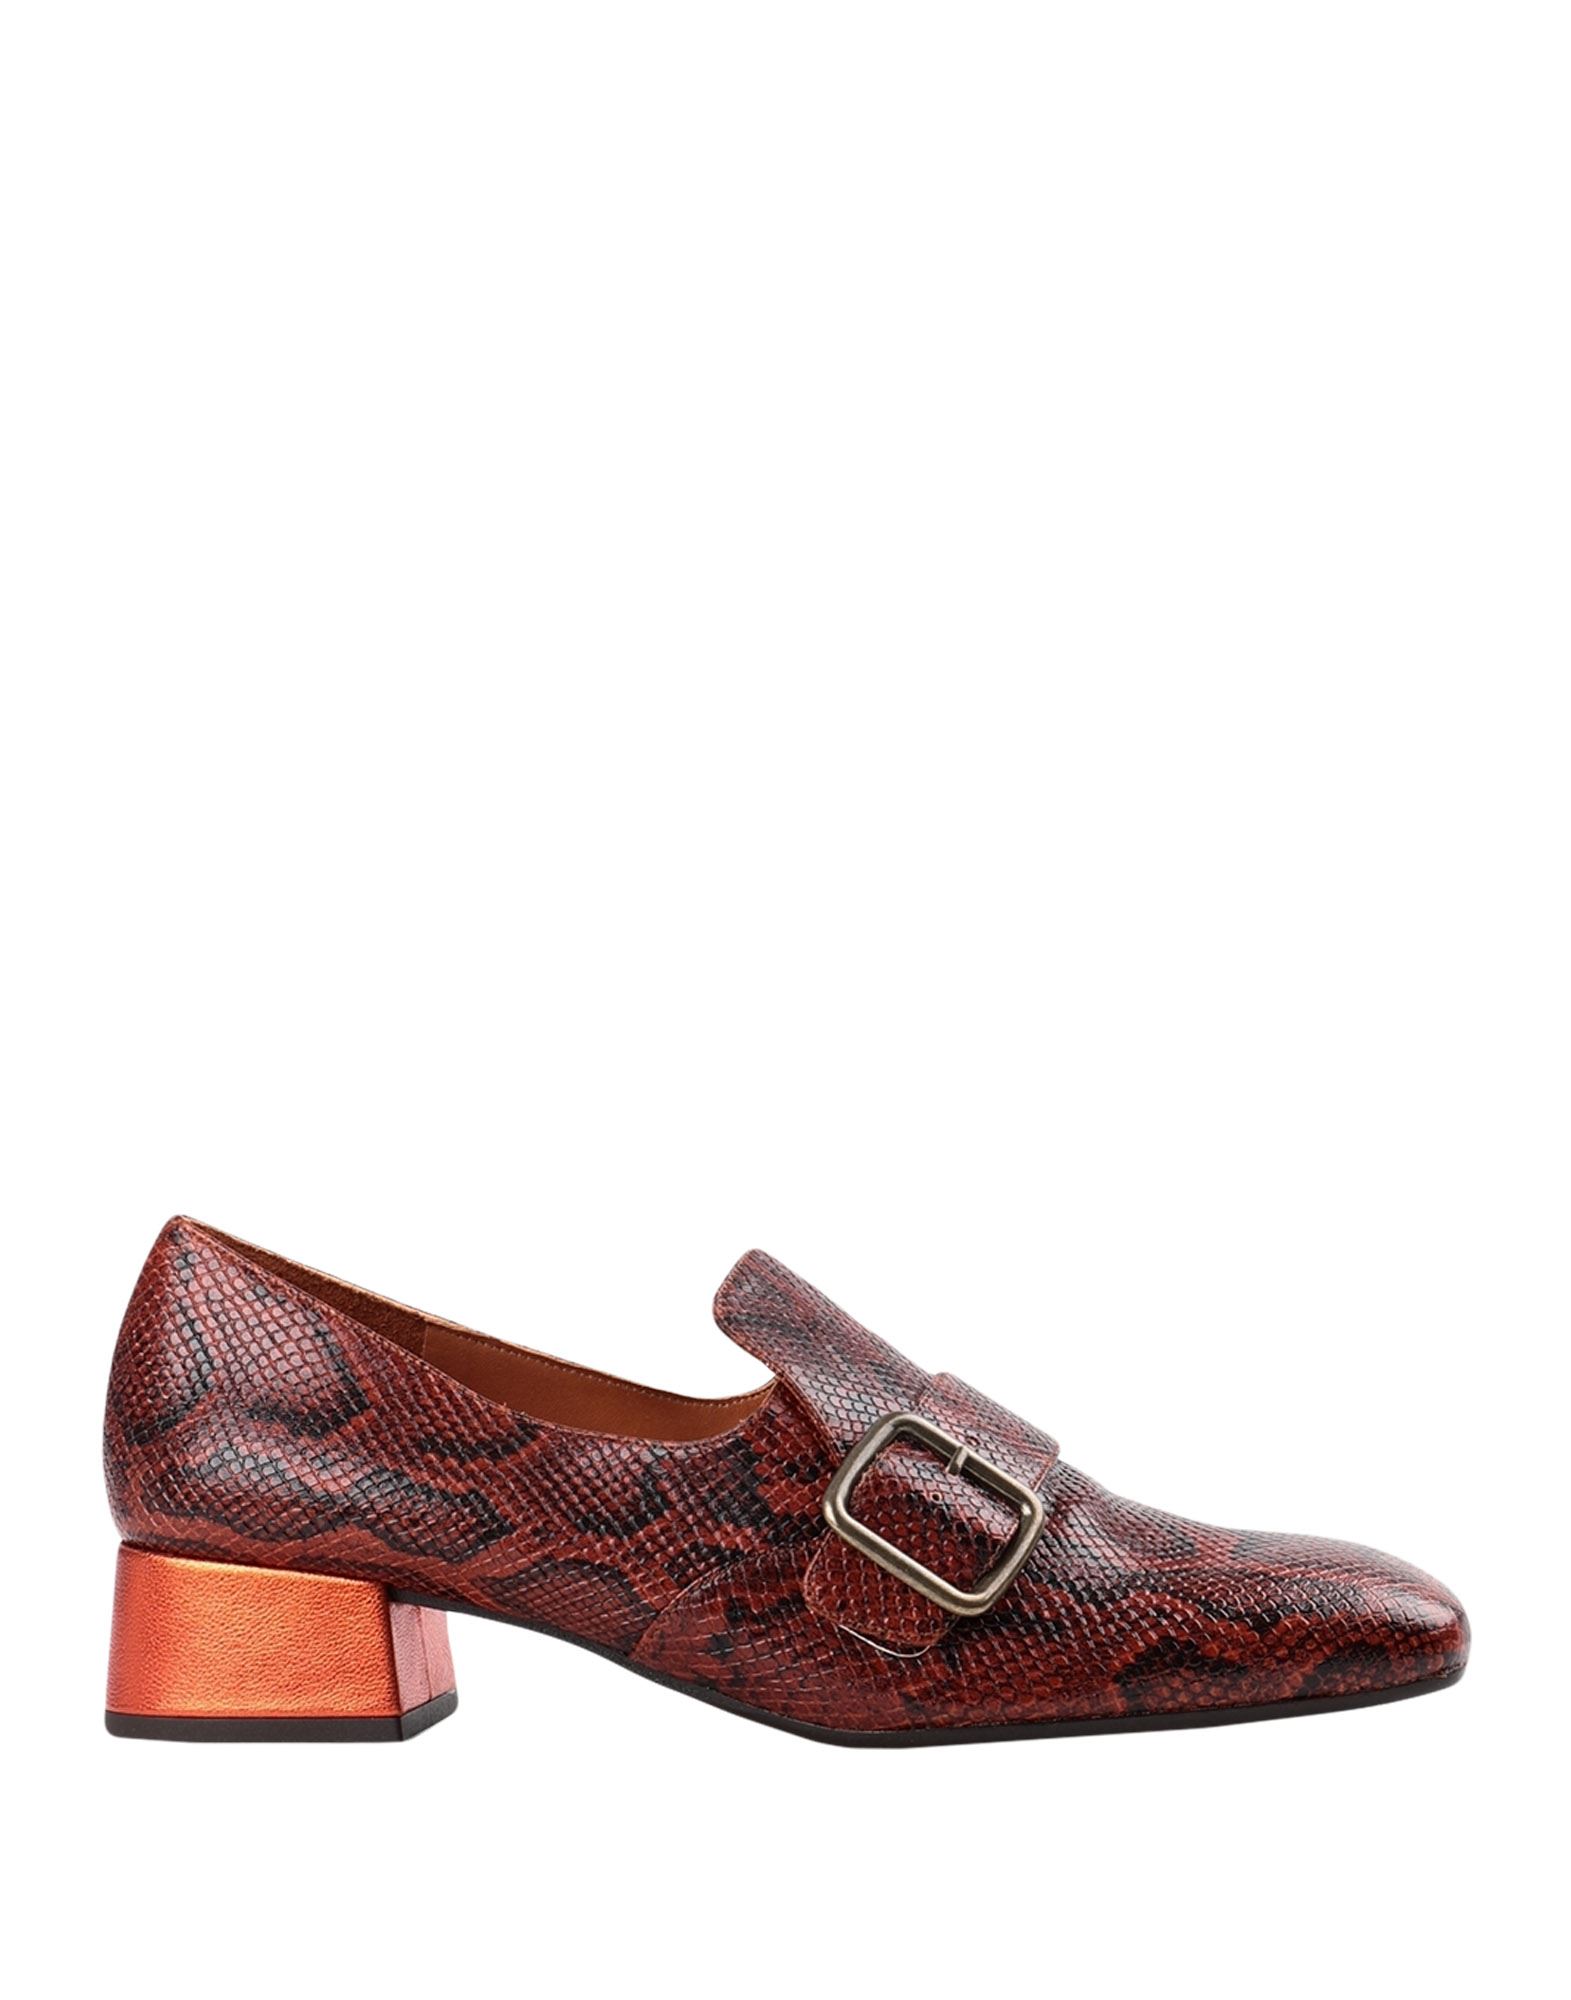 Women's CHIE MIHARA Loafers On Sale, Up To 70% Off | ModeSens